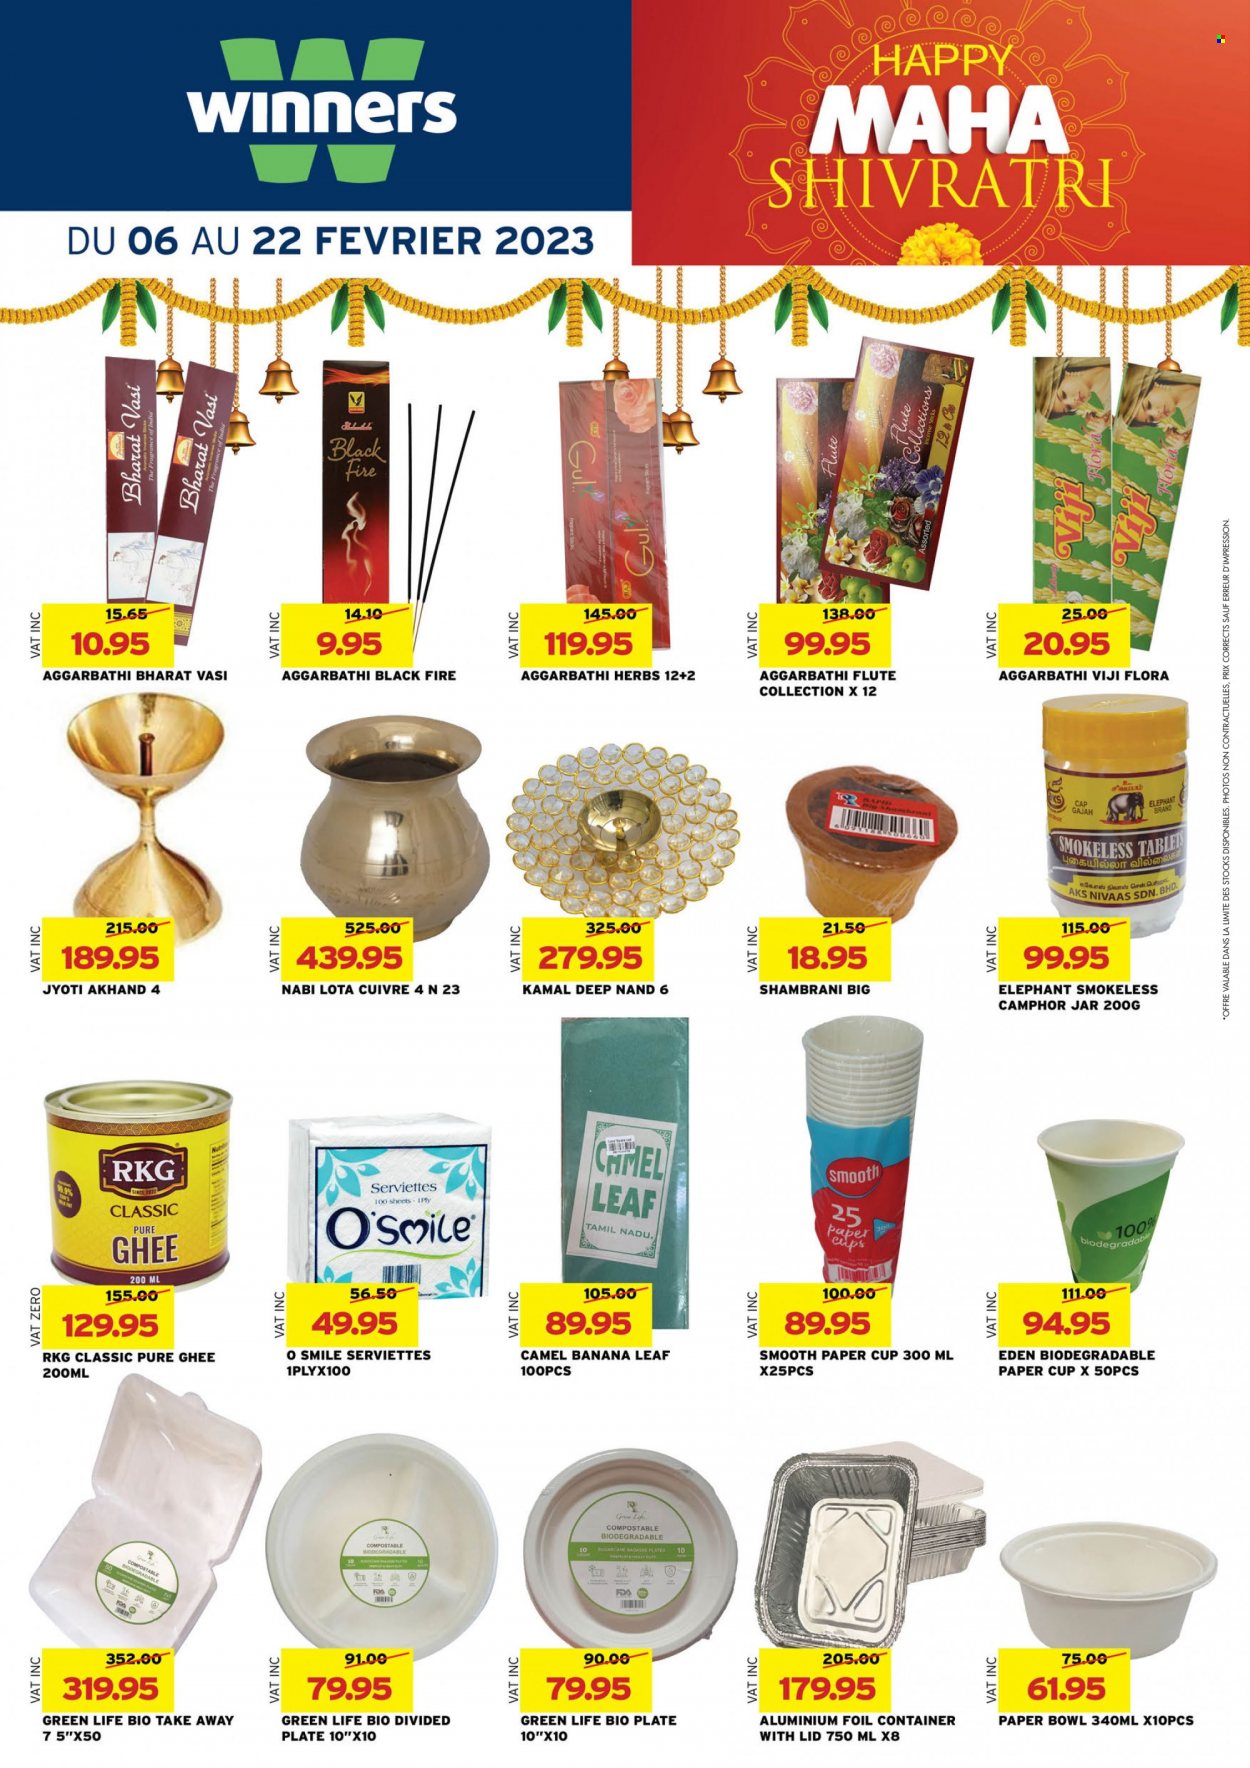 thumbnail - Winner's Catalogue - 6.02.2023 - 22.02.2023 - Sales products - sugar cane, ghee, Flora, herbs, Camel, fragrance, plate, cup, bowl, container, aluminium foil, jar, party cups, paper bowl. Page 25.